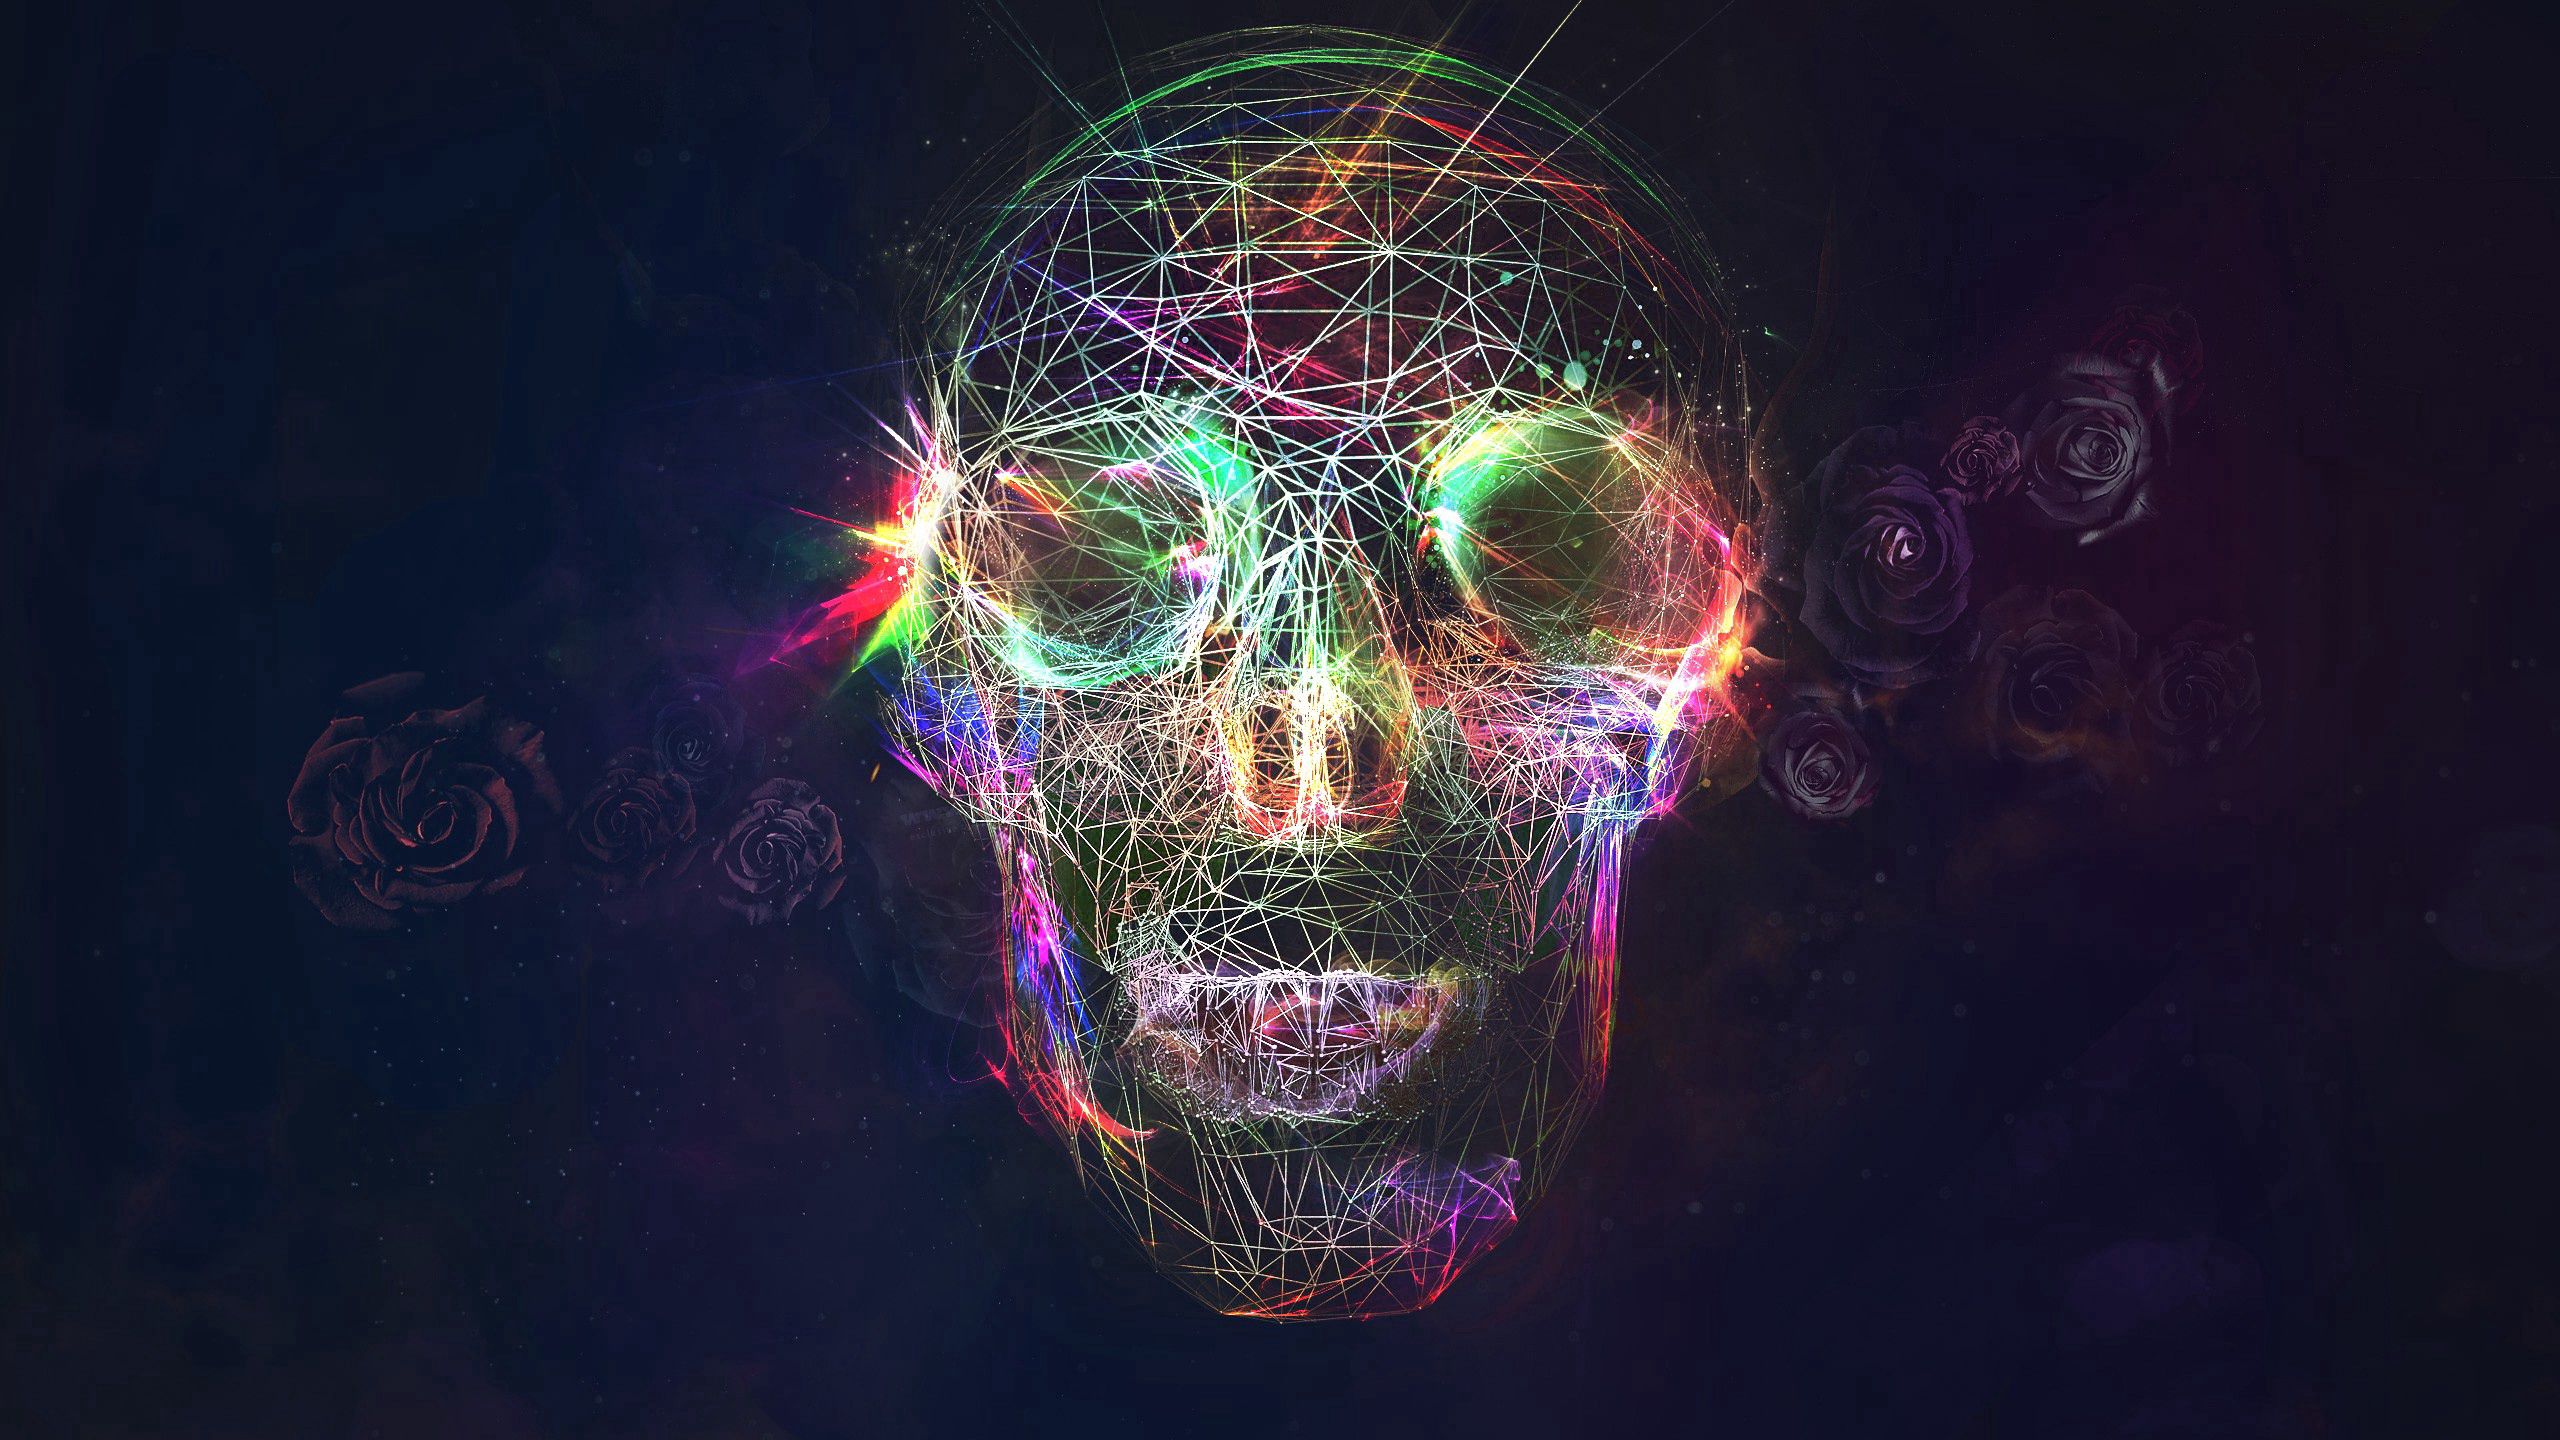 118338 download wallpaper skull, abstract, background, bright screensavers and pictures for free